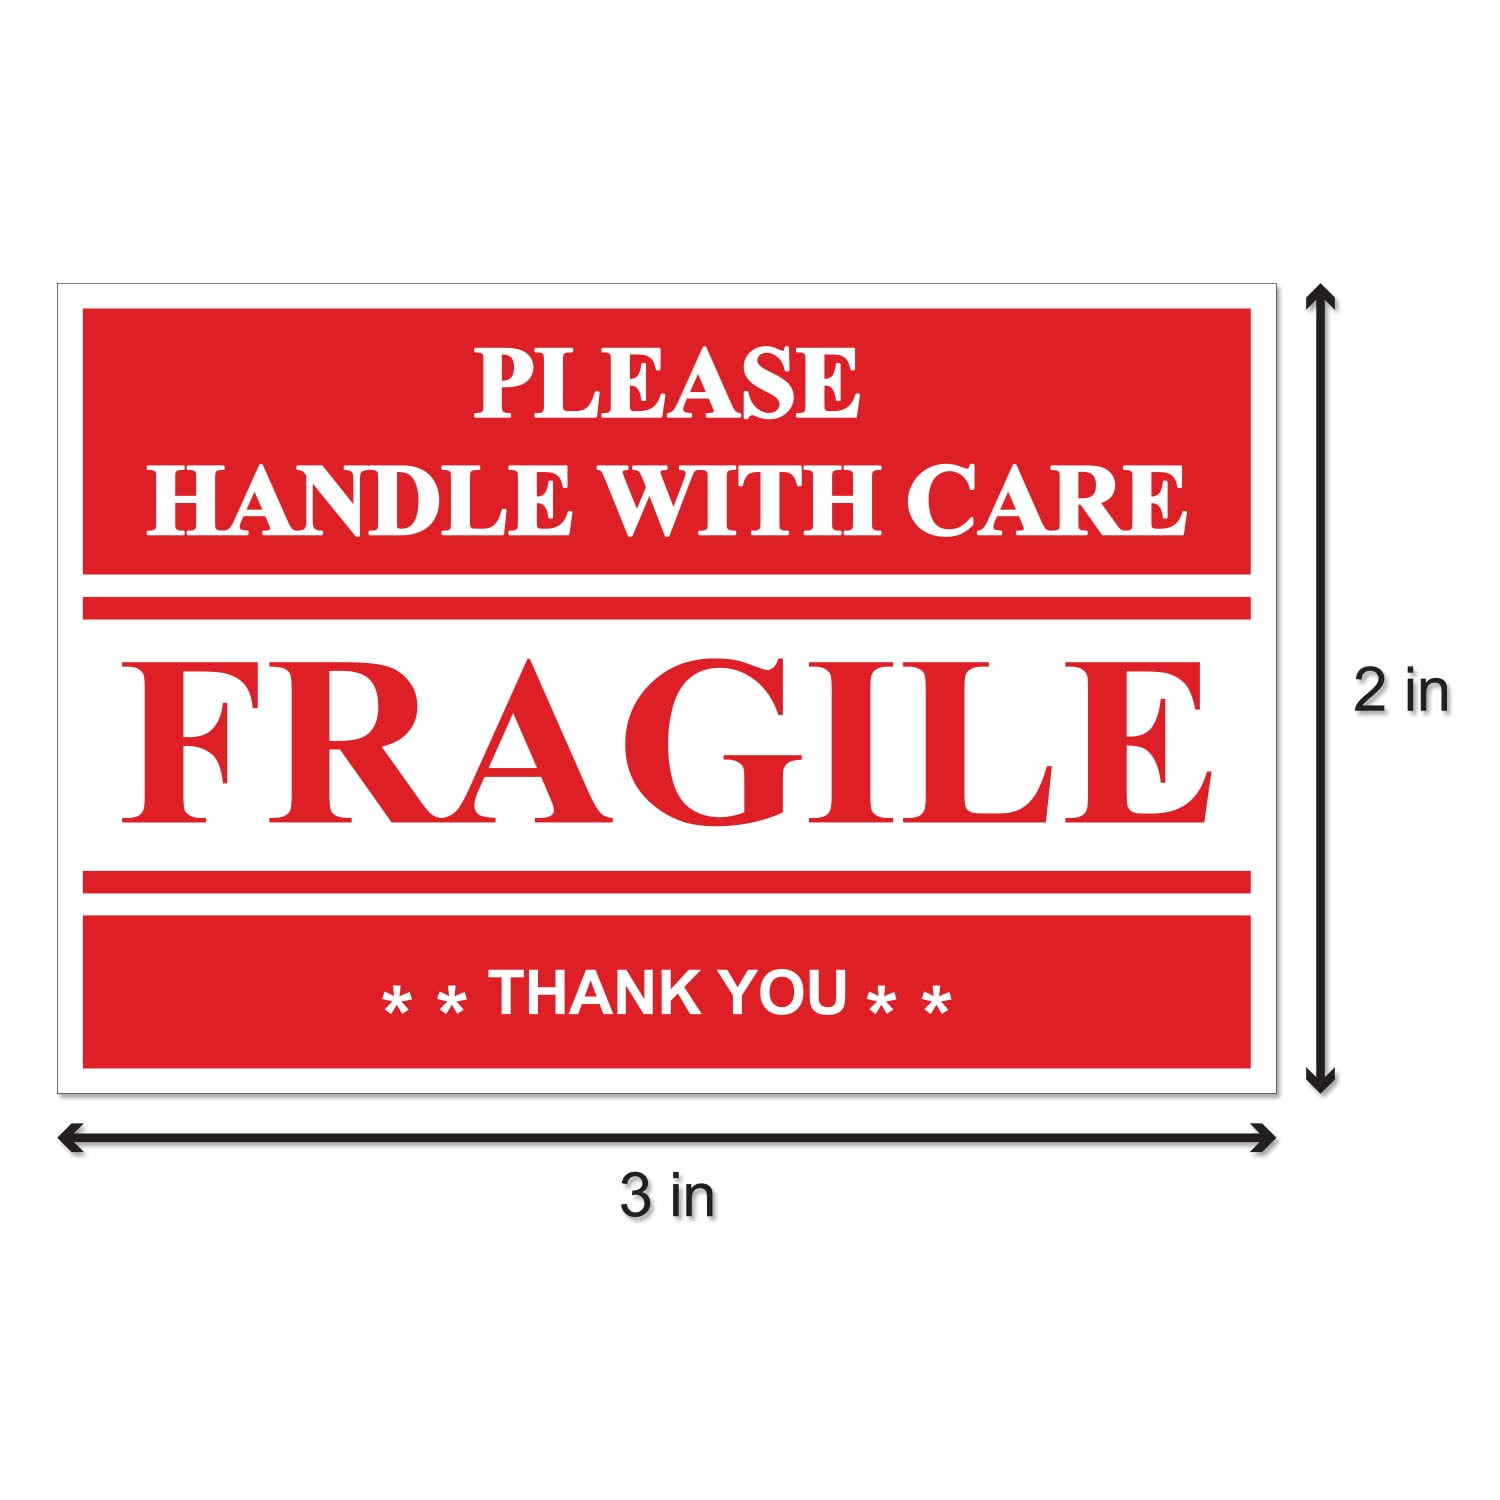 2000 PCS 3" x 5" Handle With Care Fragile Label Warning Sticker Semi Gloss Red 